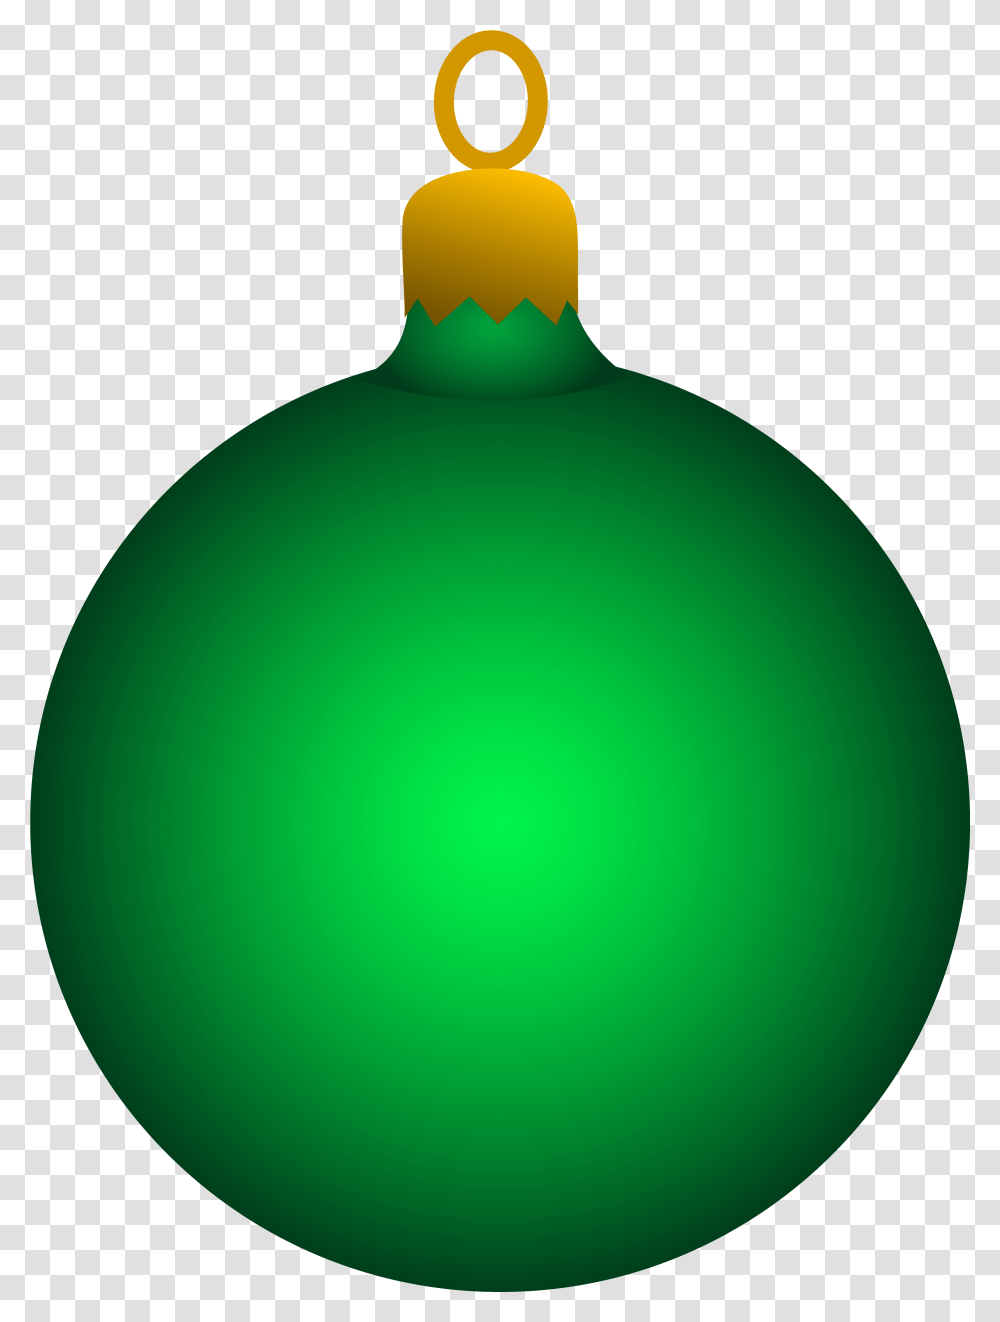 Ornament Christmas Tree & Clipart Free Green Christmas Ornament Clipart, Balloon, Sphere, Clothing, Lighting Transparent Png